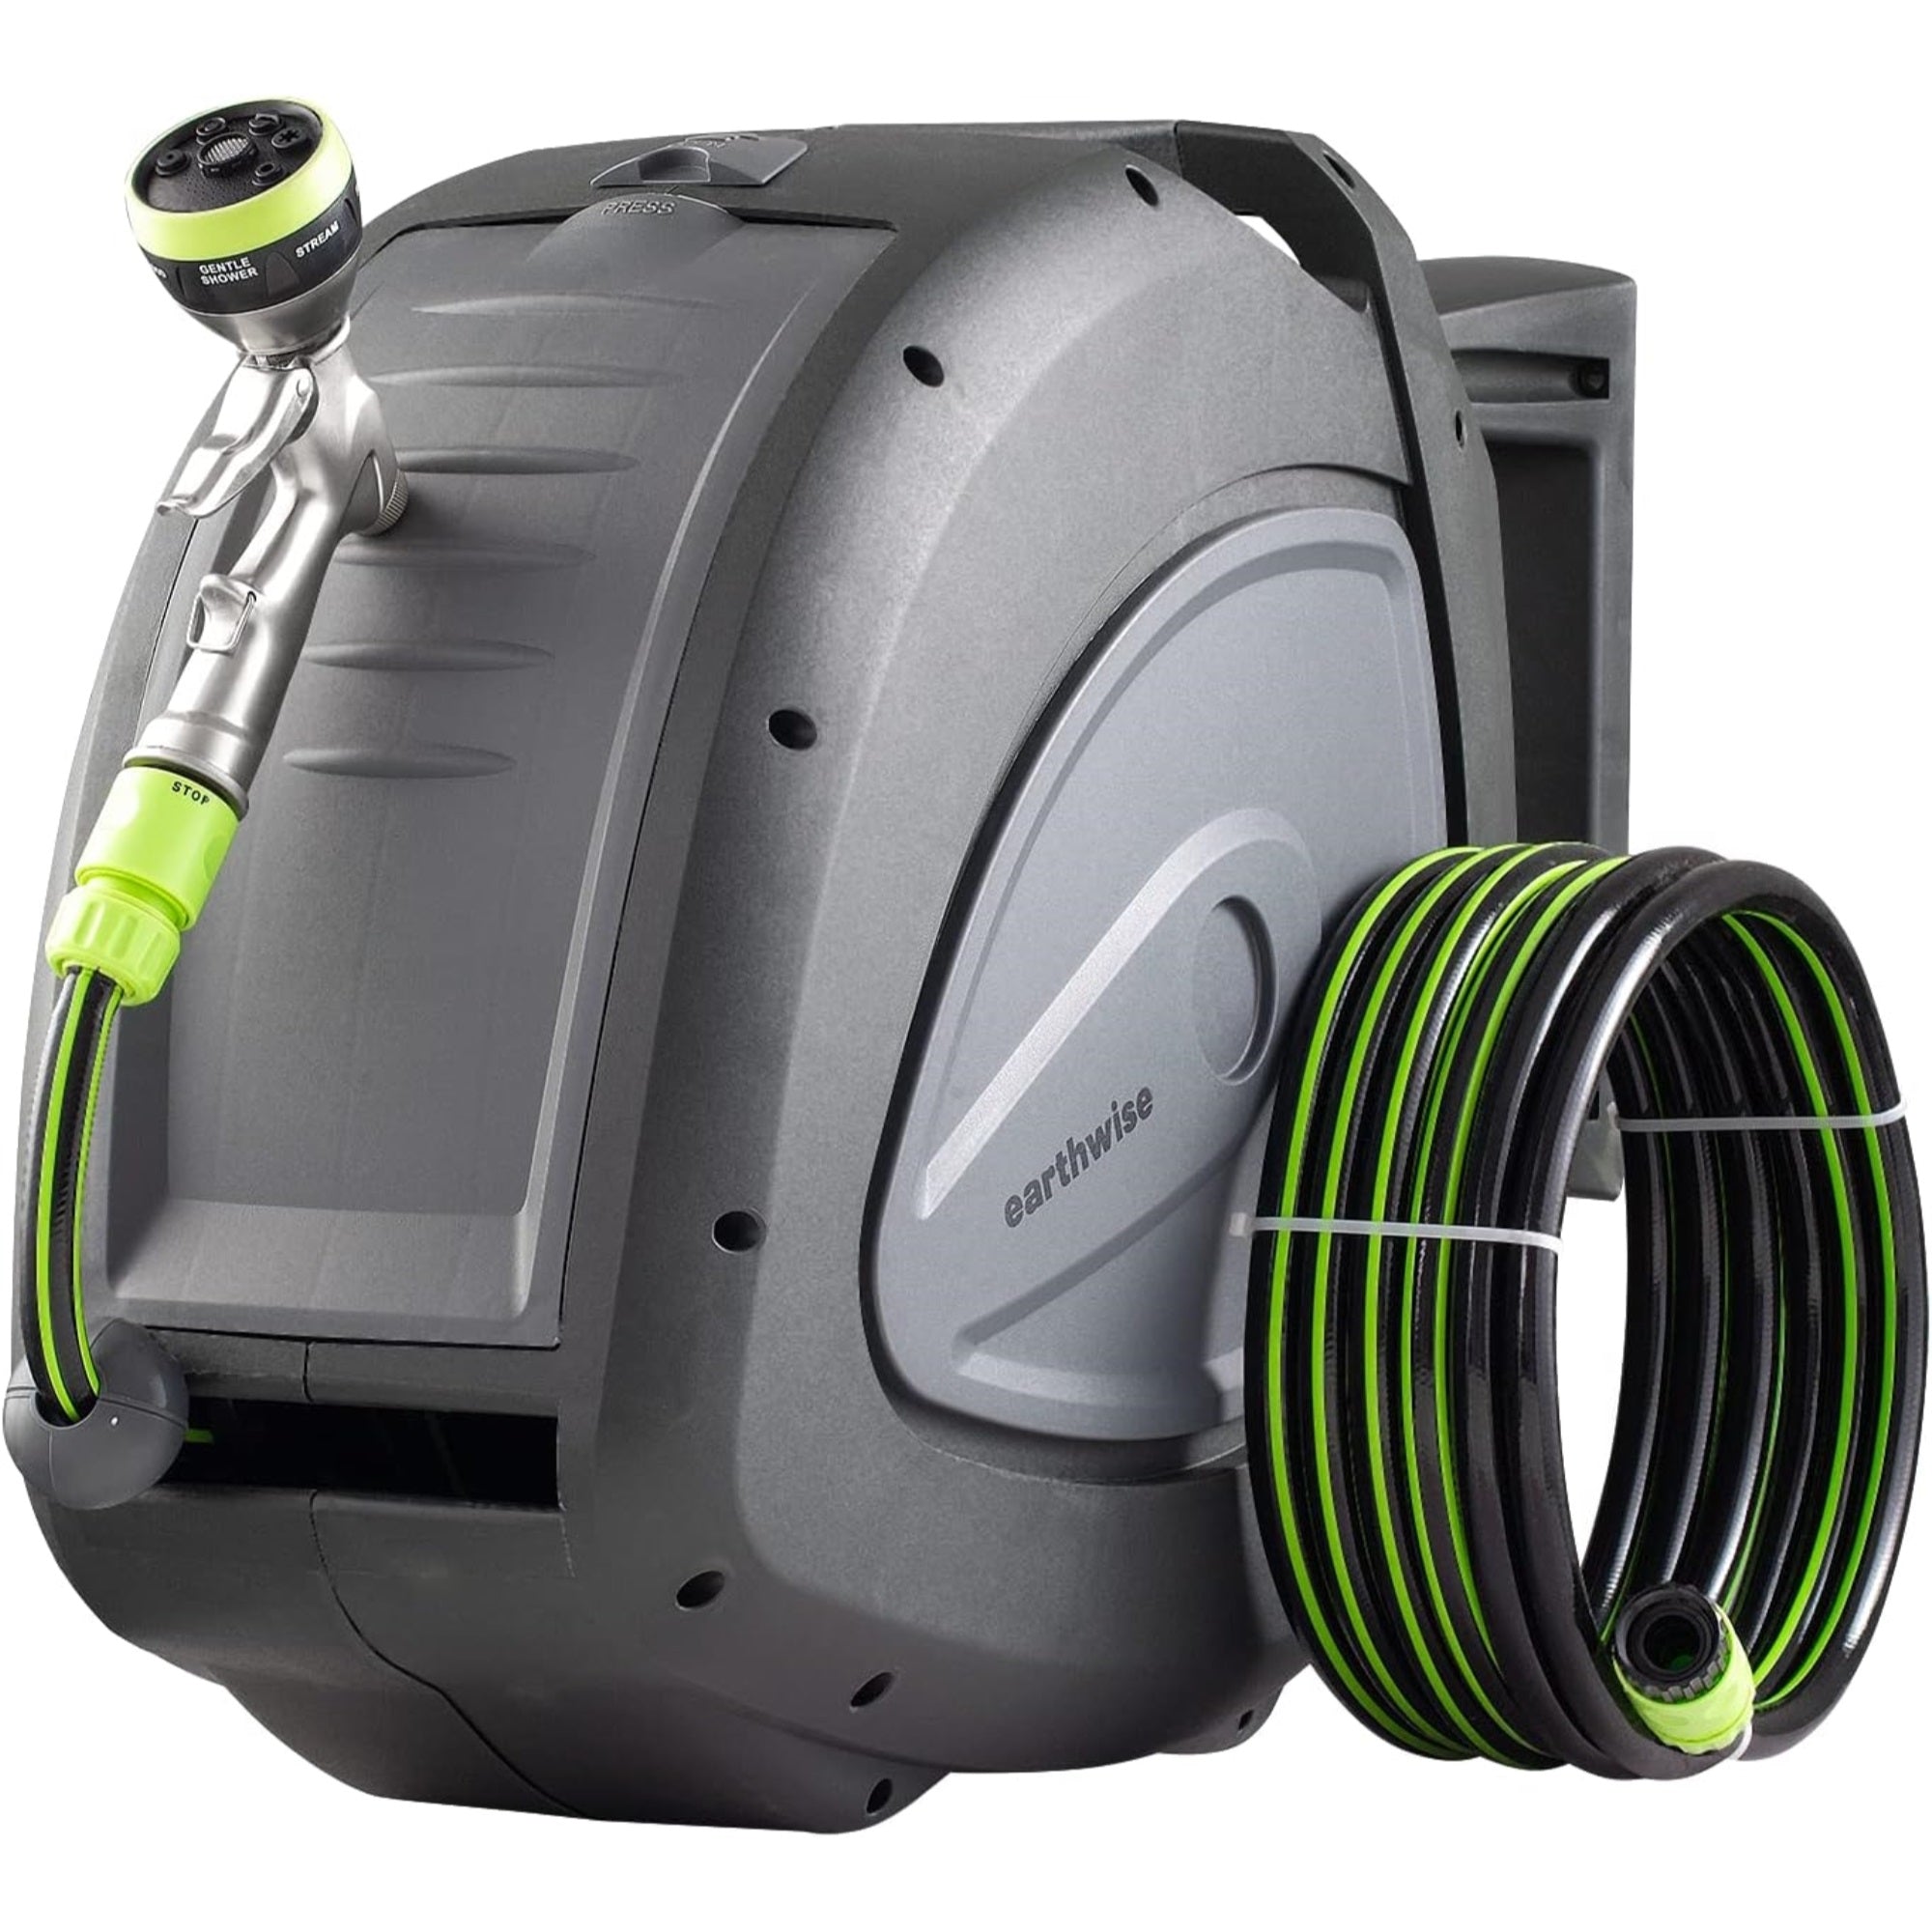 Earthwise Power Tools by ALM Modern Retractable Hose Reel, Black, 130'